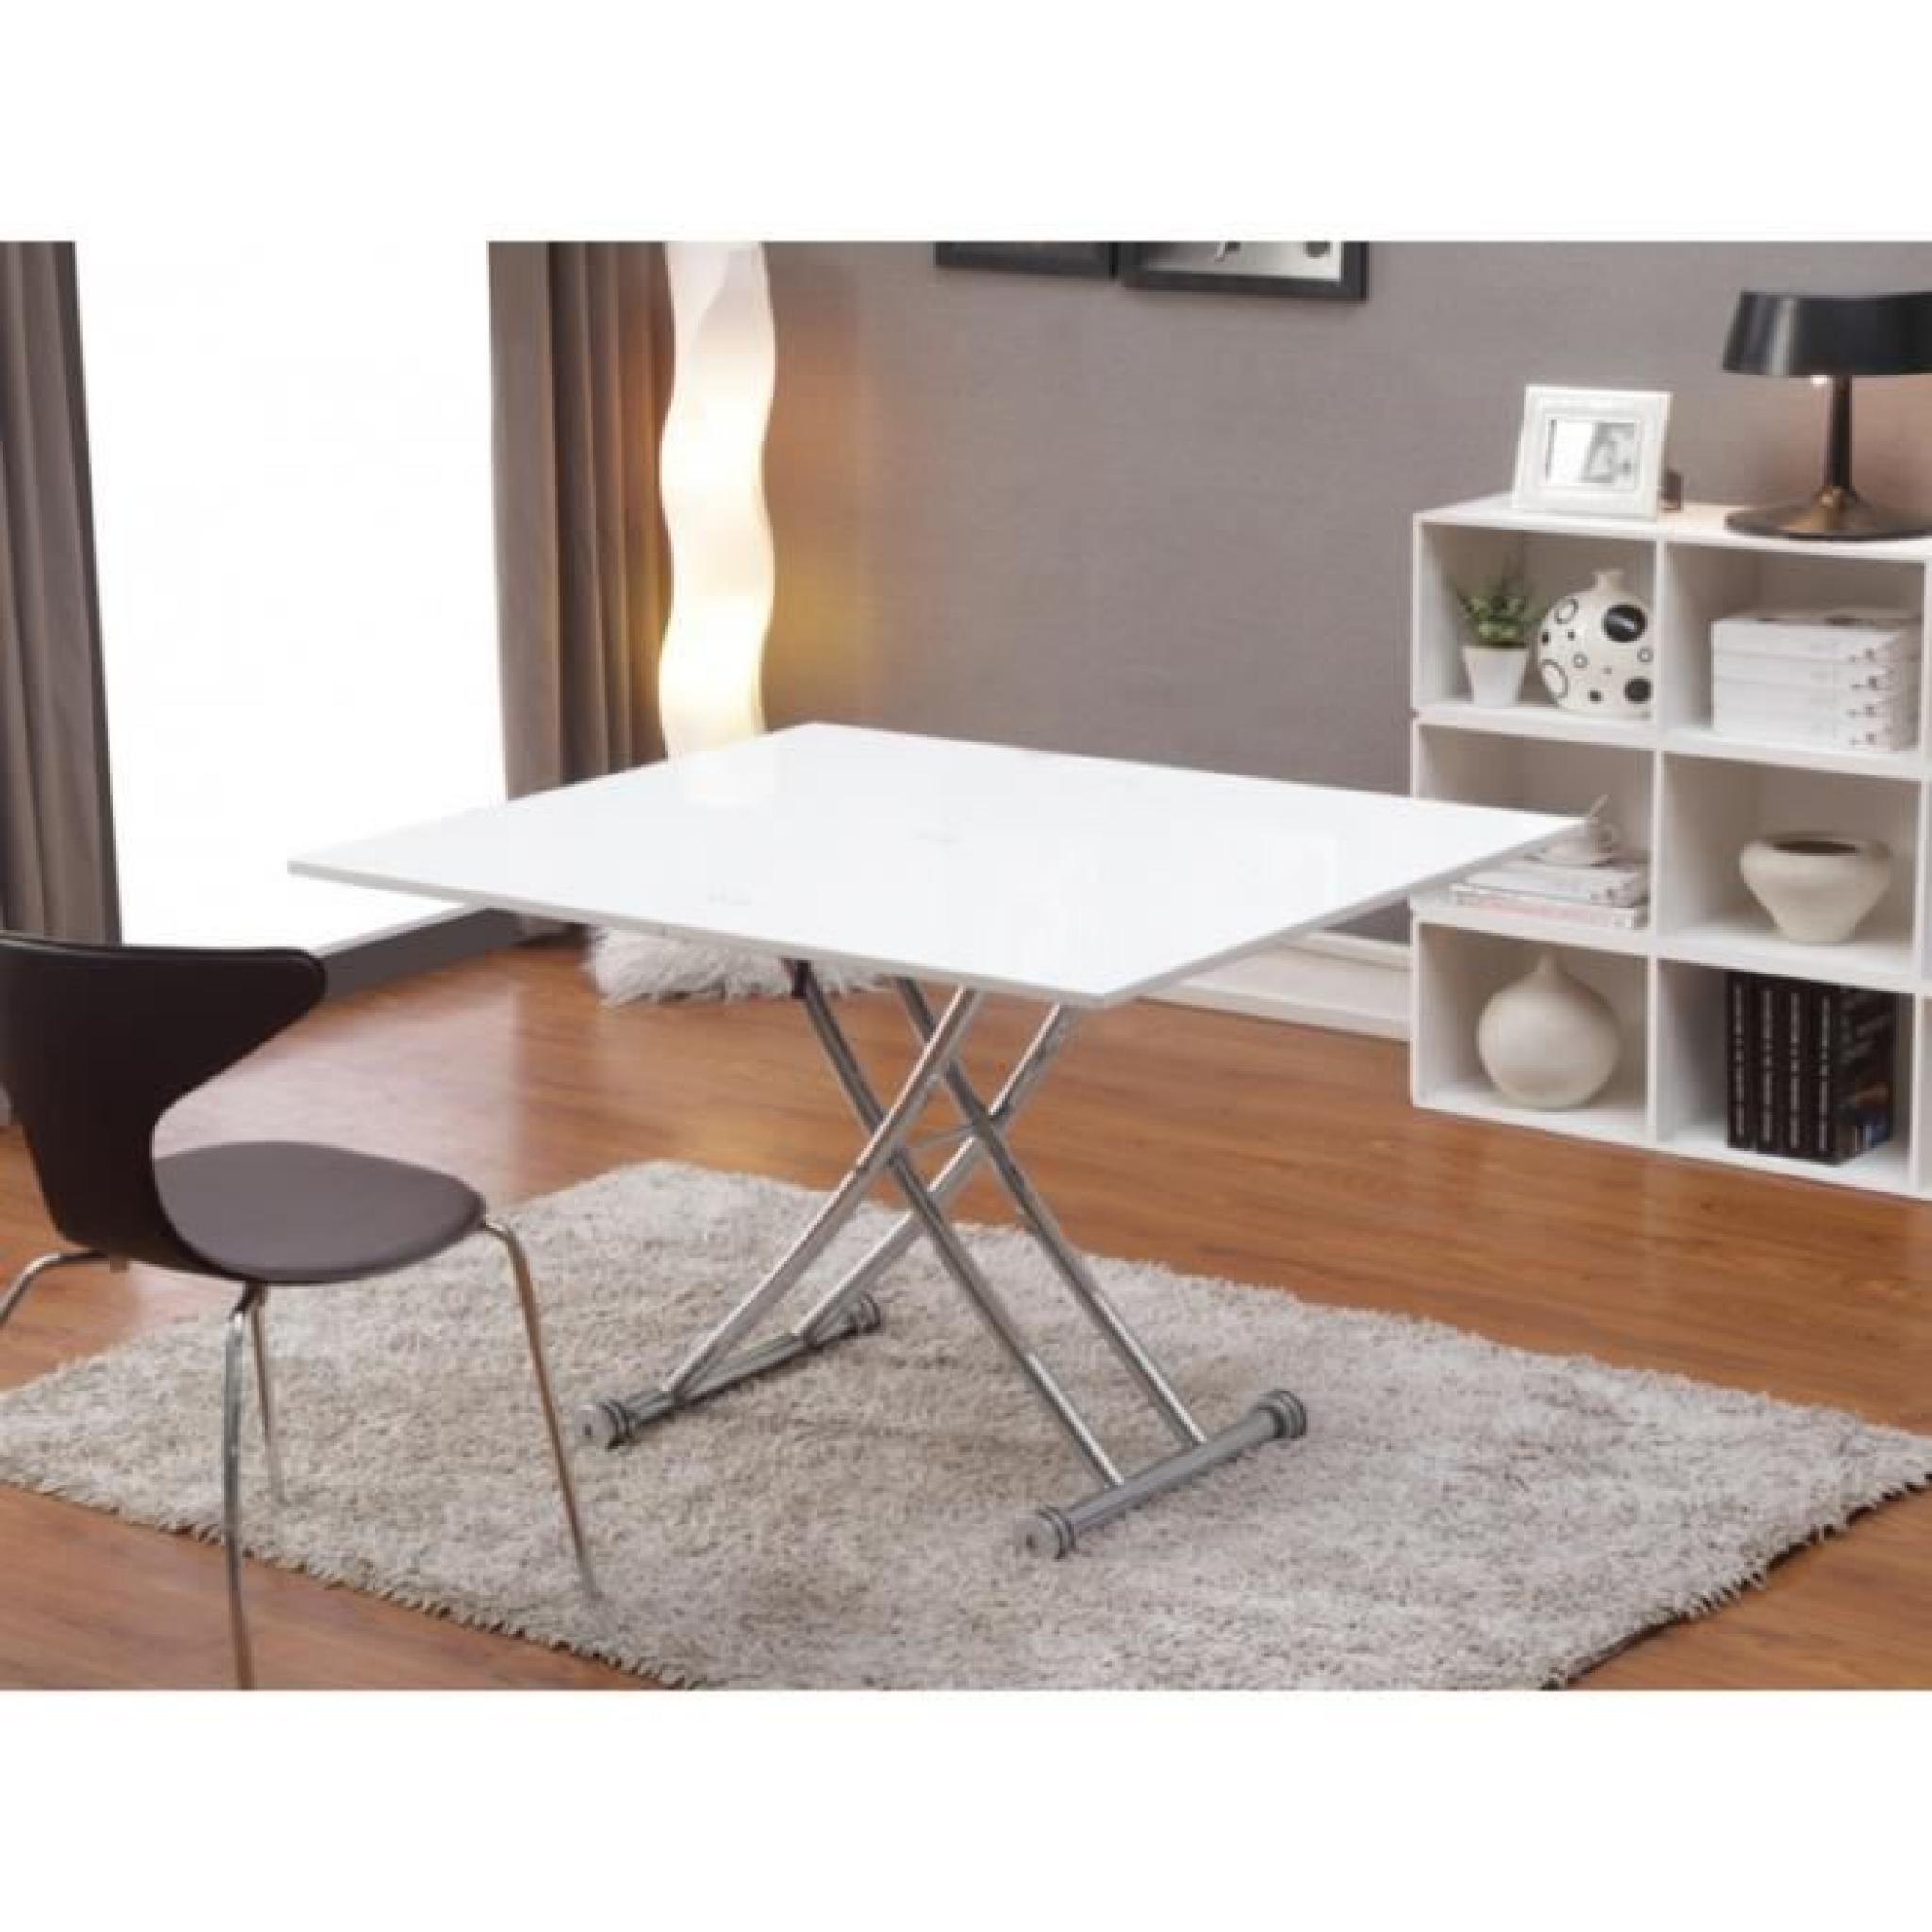 Table extensible Up & Down CLEVER - 4 couverts - C pas cher